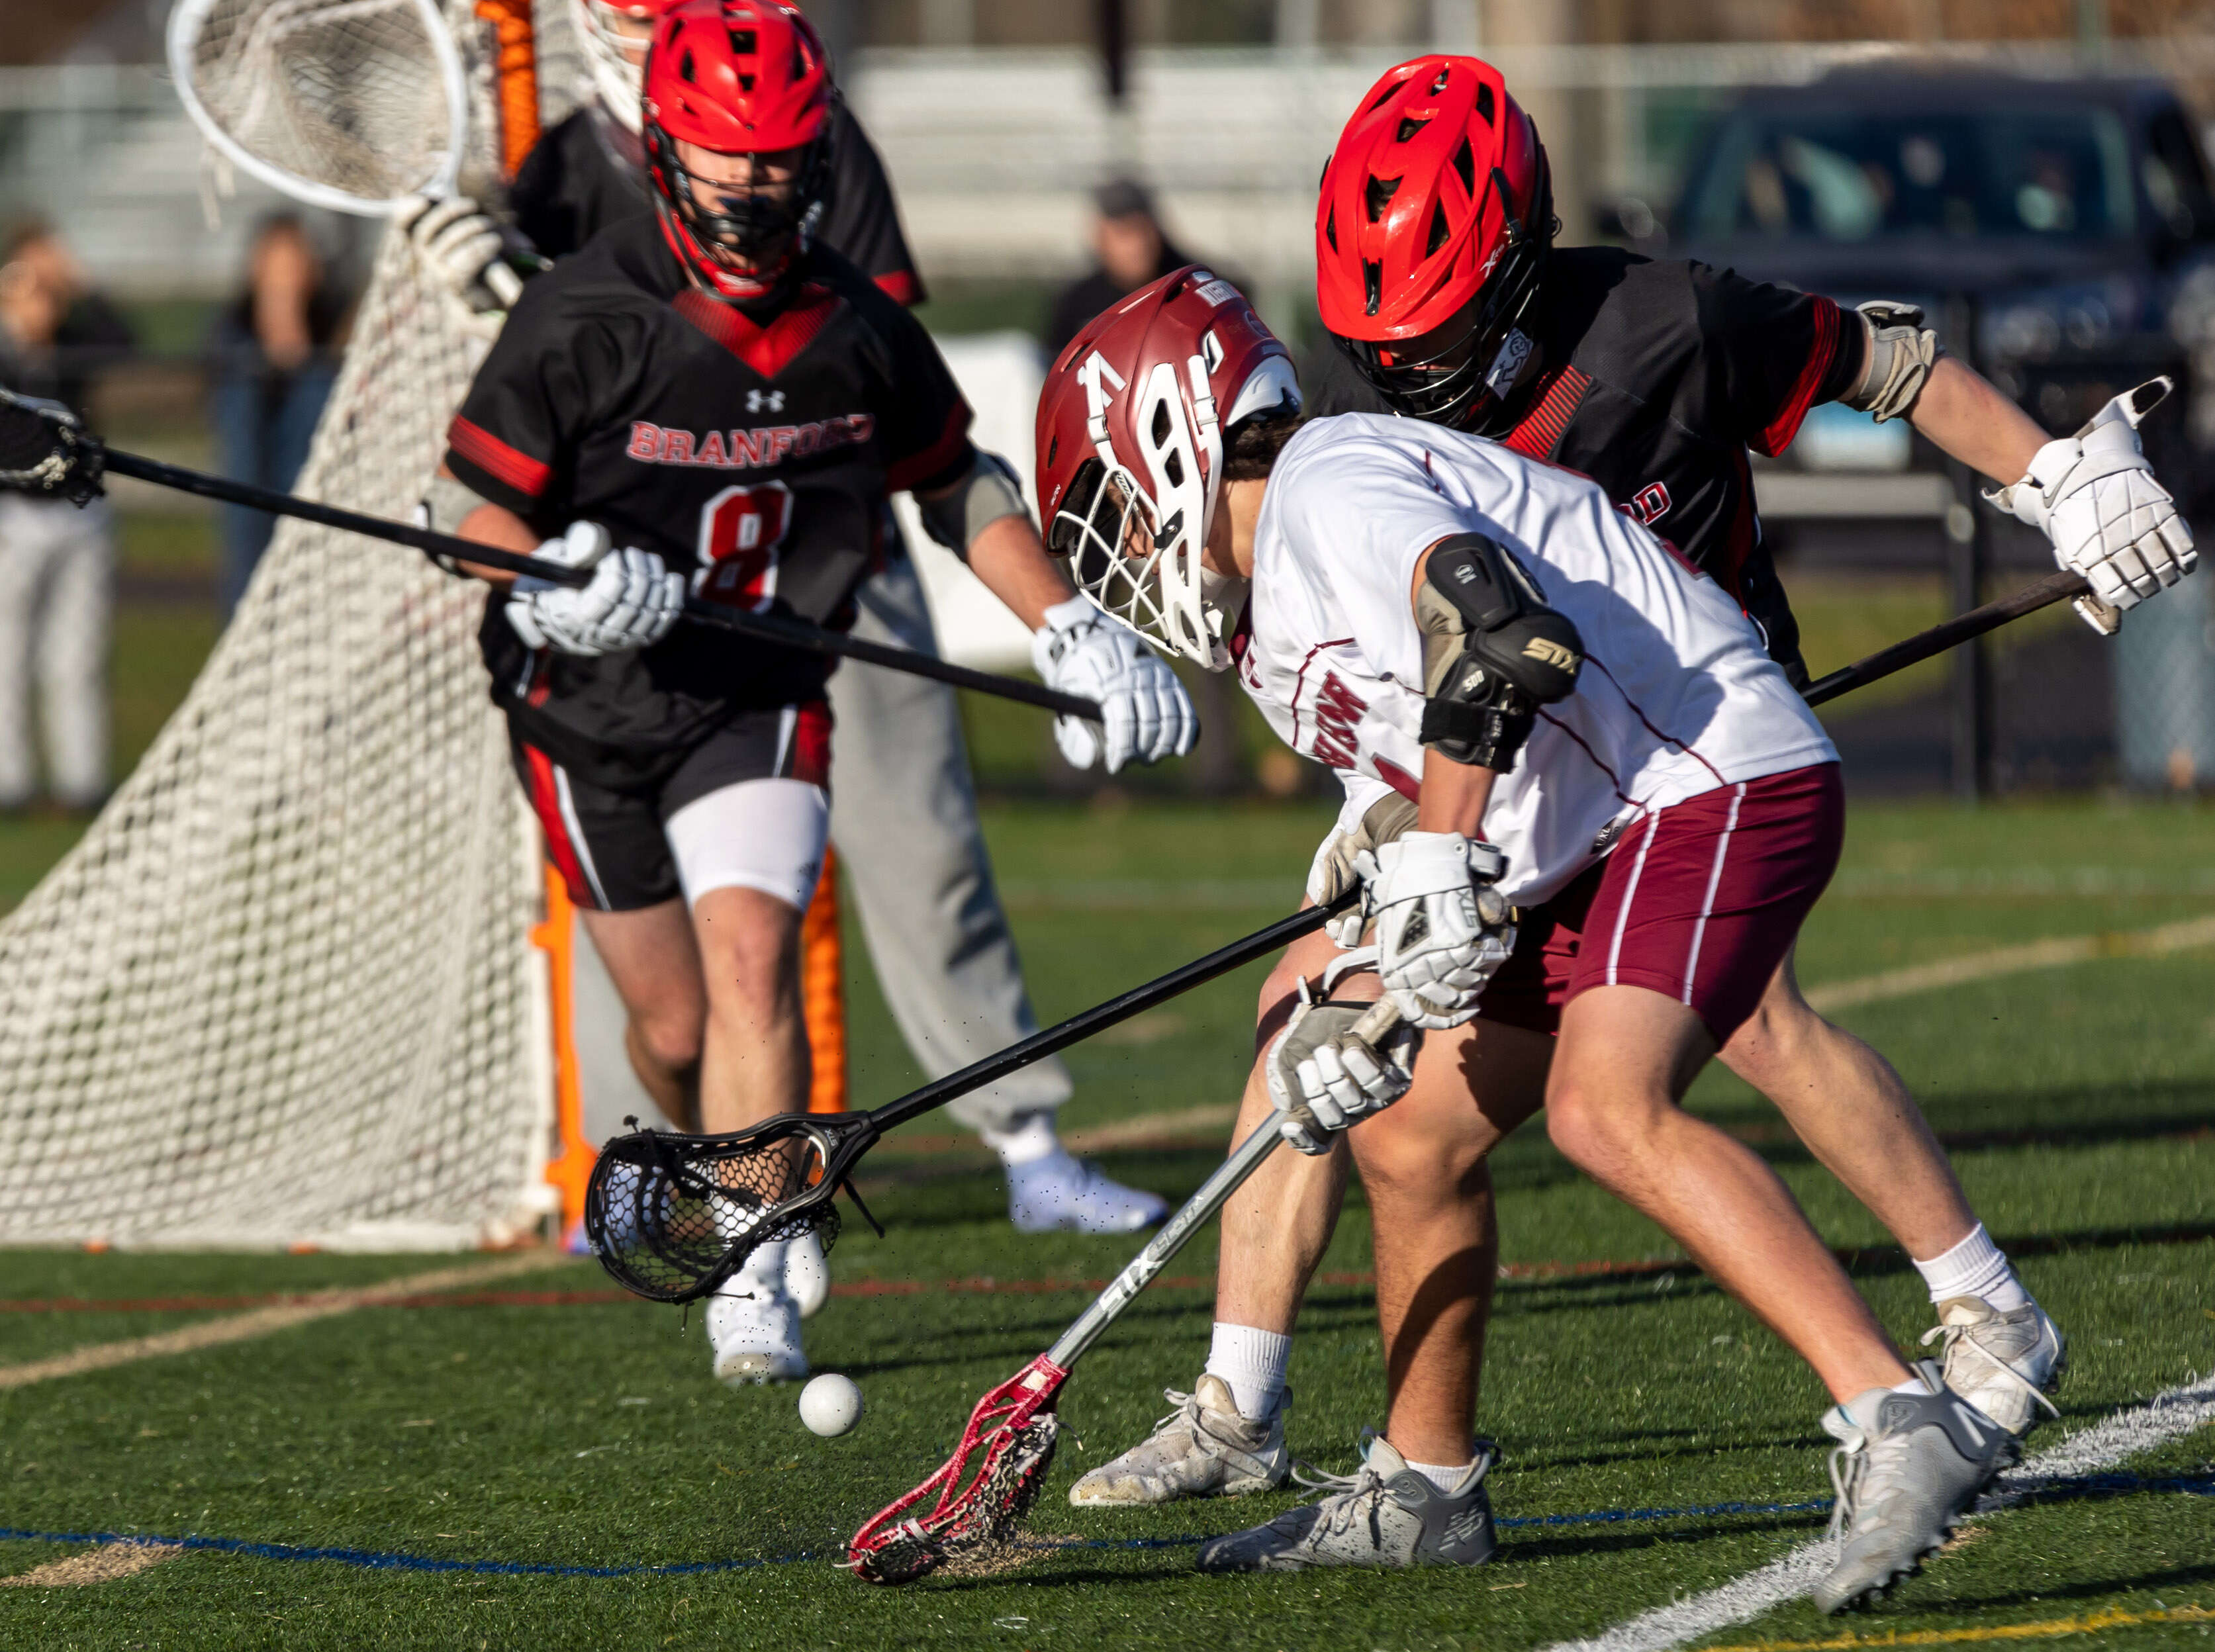 Shooting and Dodging - Burning River Lacrosse